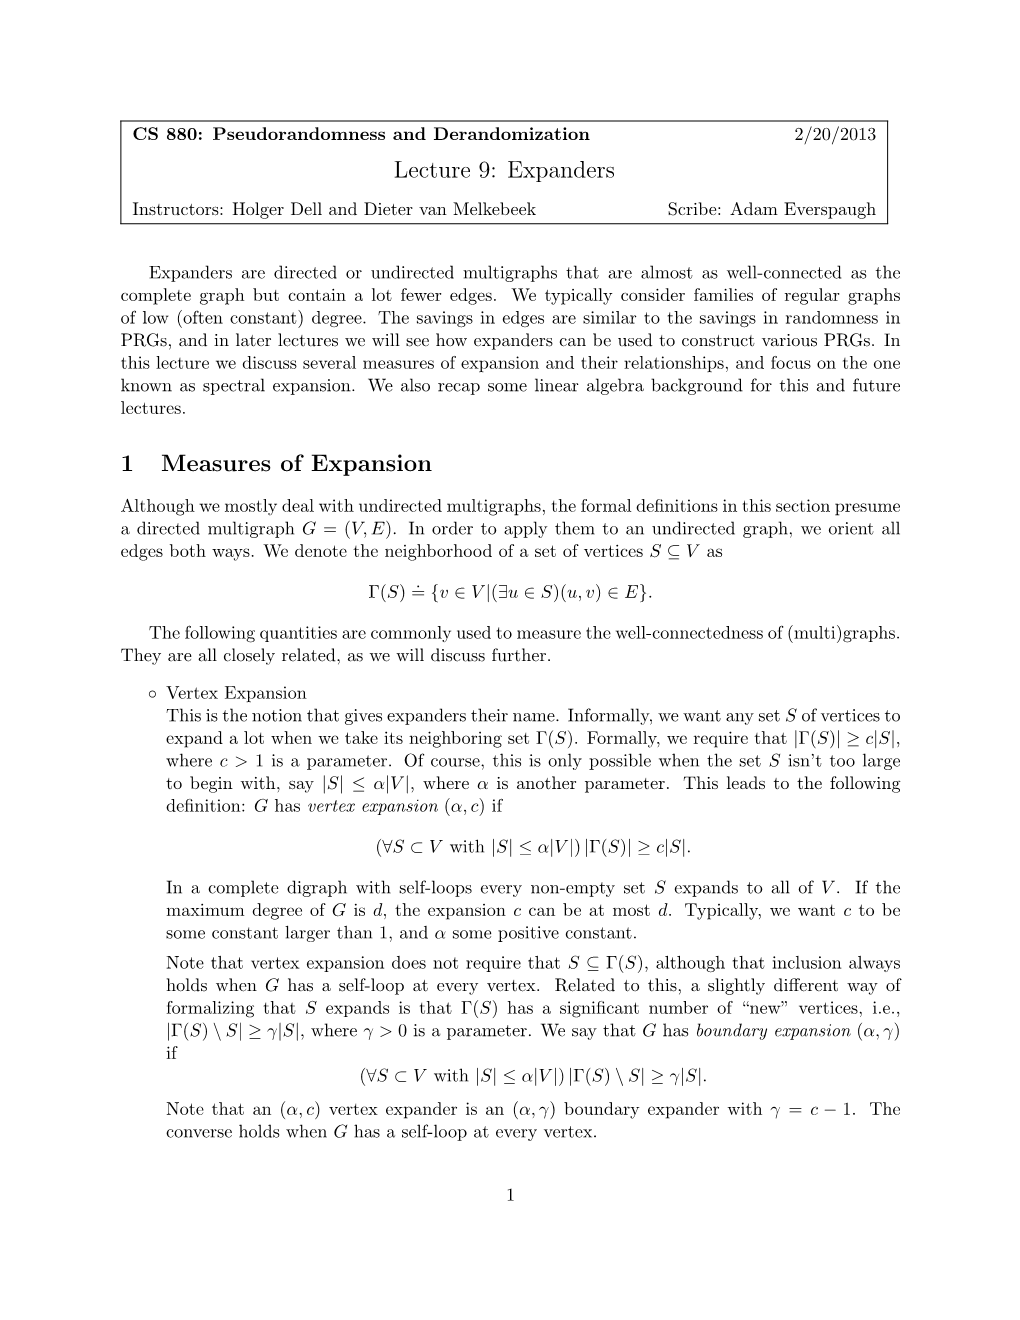 Lecture 9: Expanders 1 Measures of Expansion